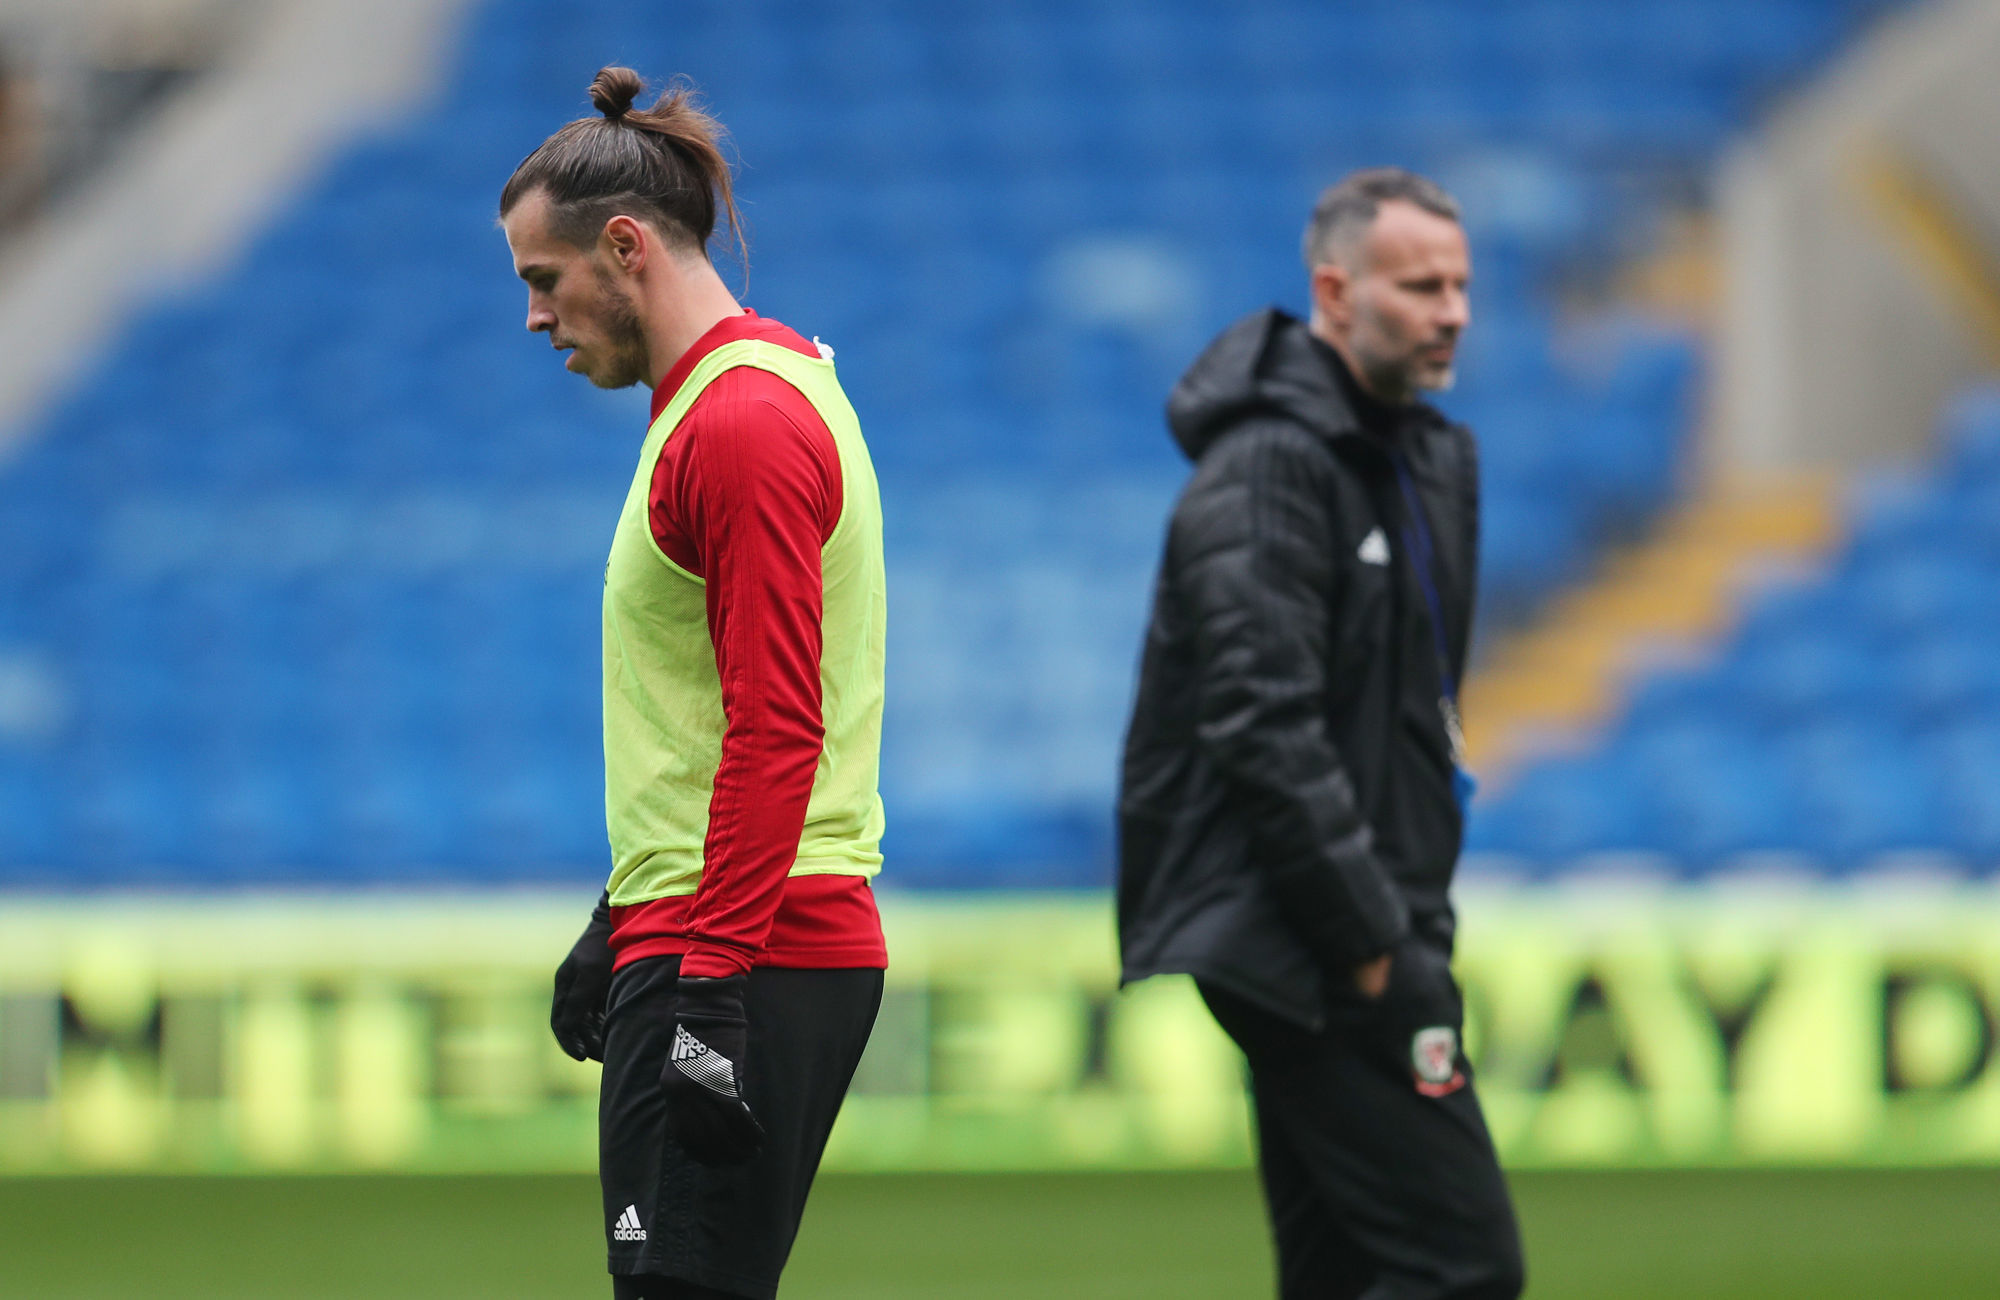 Wales' Gareth Bale and Ryan Giggs during the training session at The Cardiff City Stadium in Cardiff on November 15th, 2018.
Photo : PA Images / Icon Sport